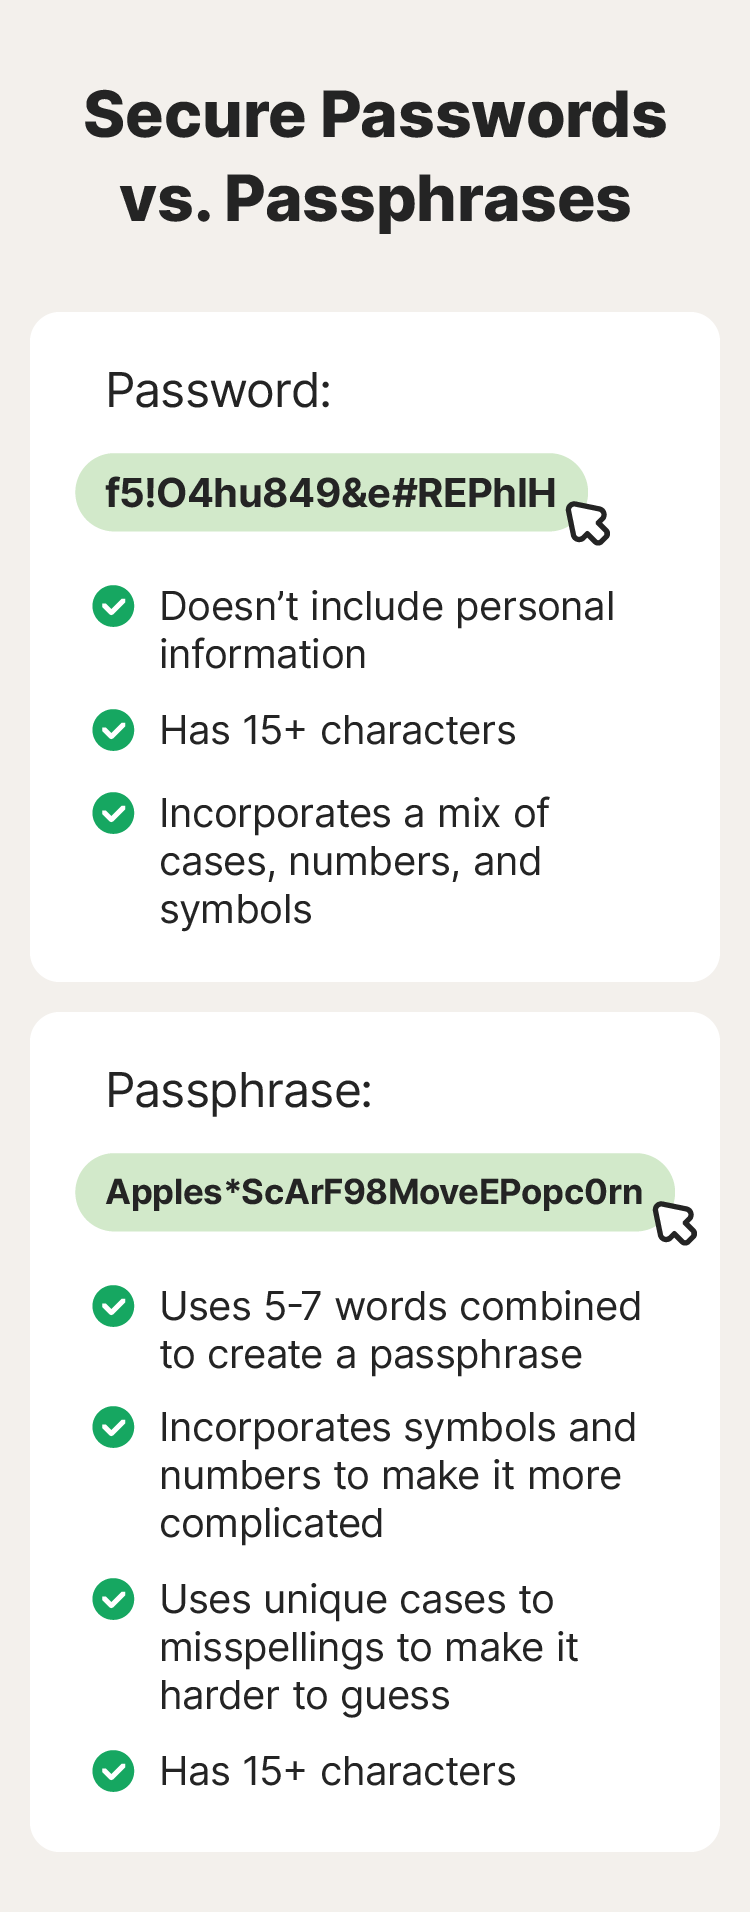 An example of a strong password and a strong passphrase.